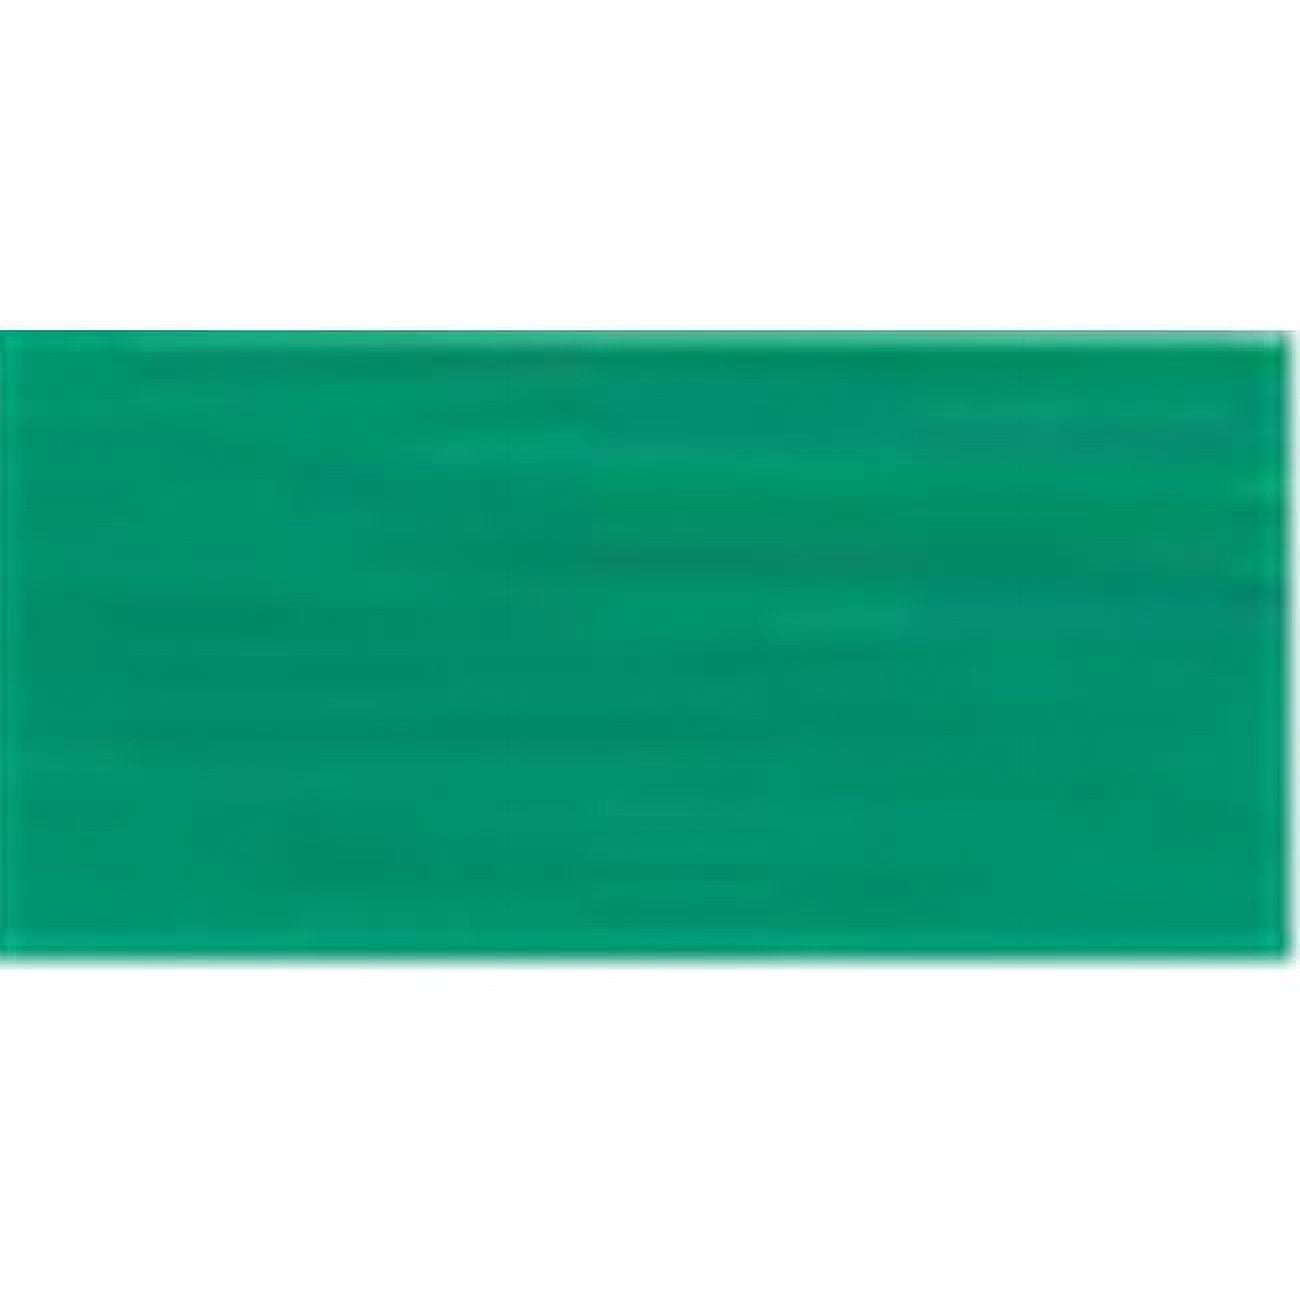 Gutermann Cotton Thread, 100m Bright Green, 7830 – Cary Quilting Company